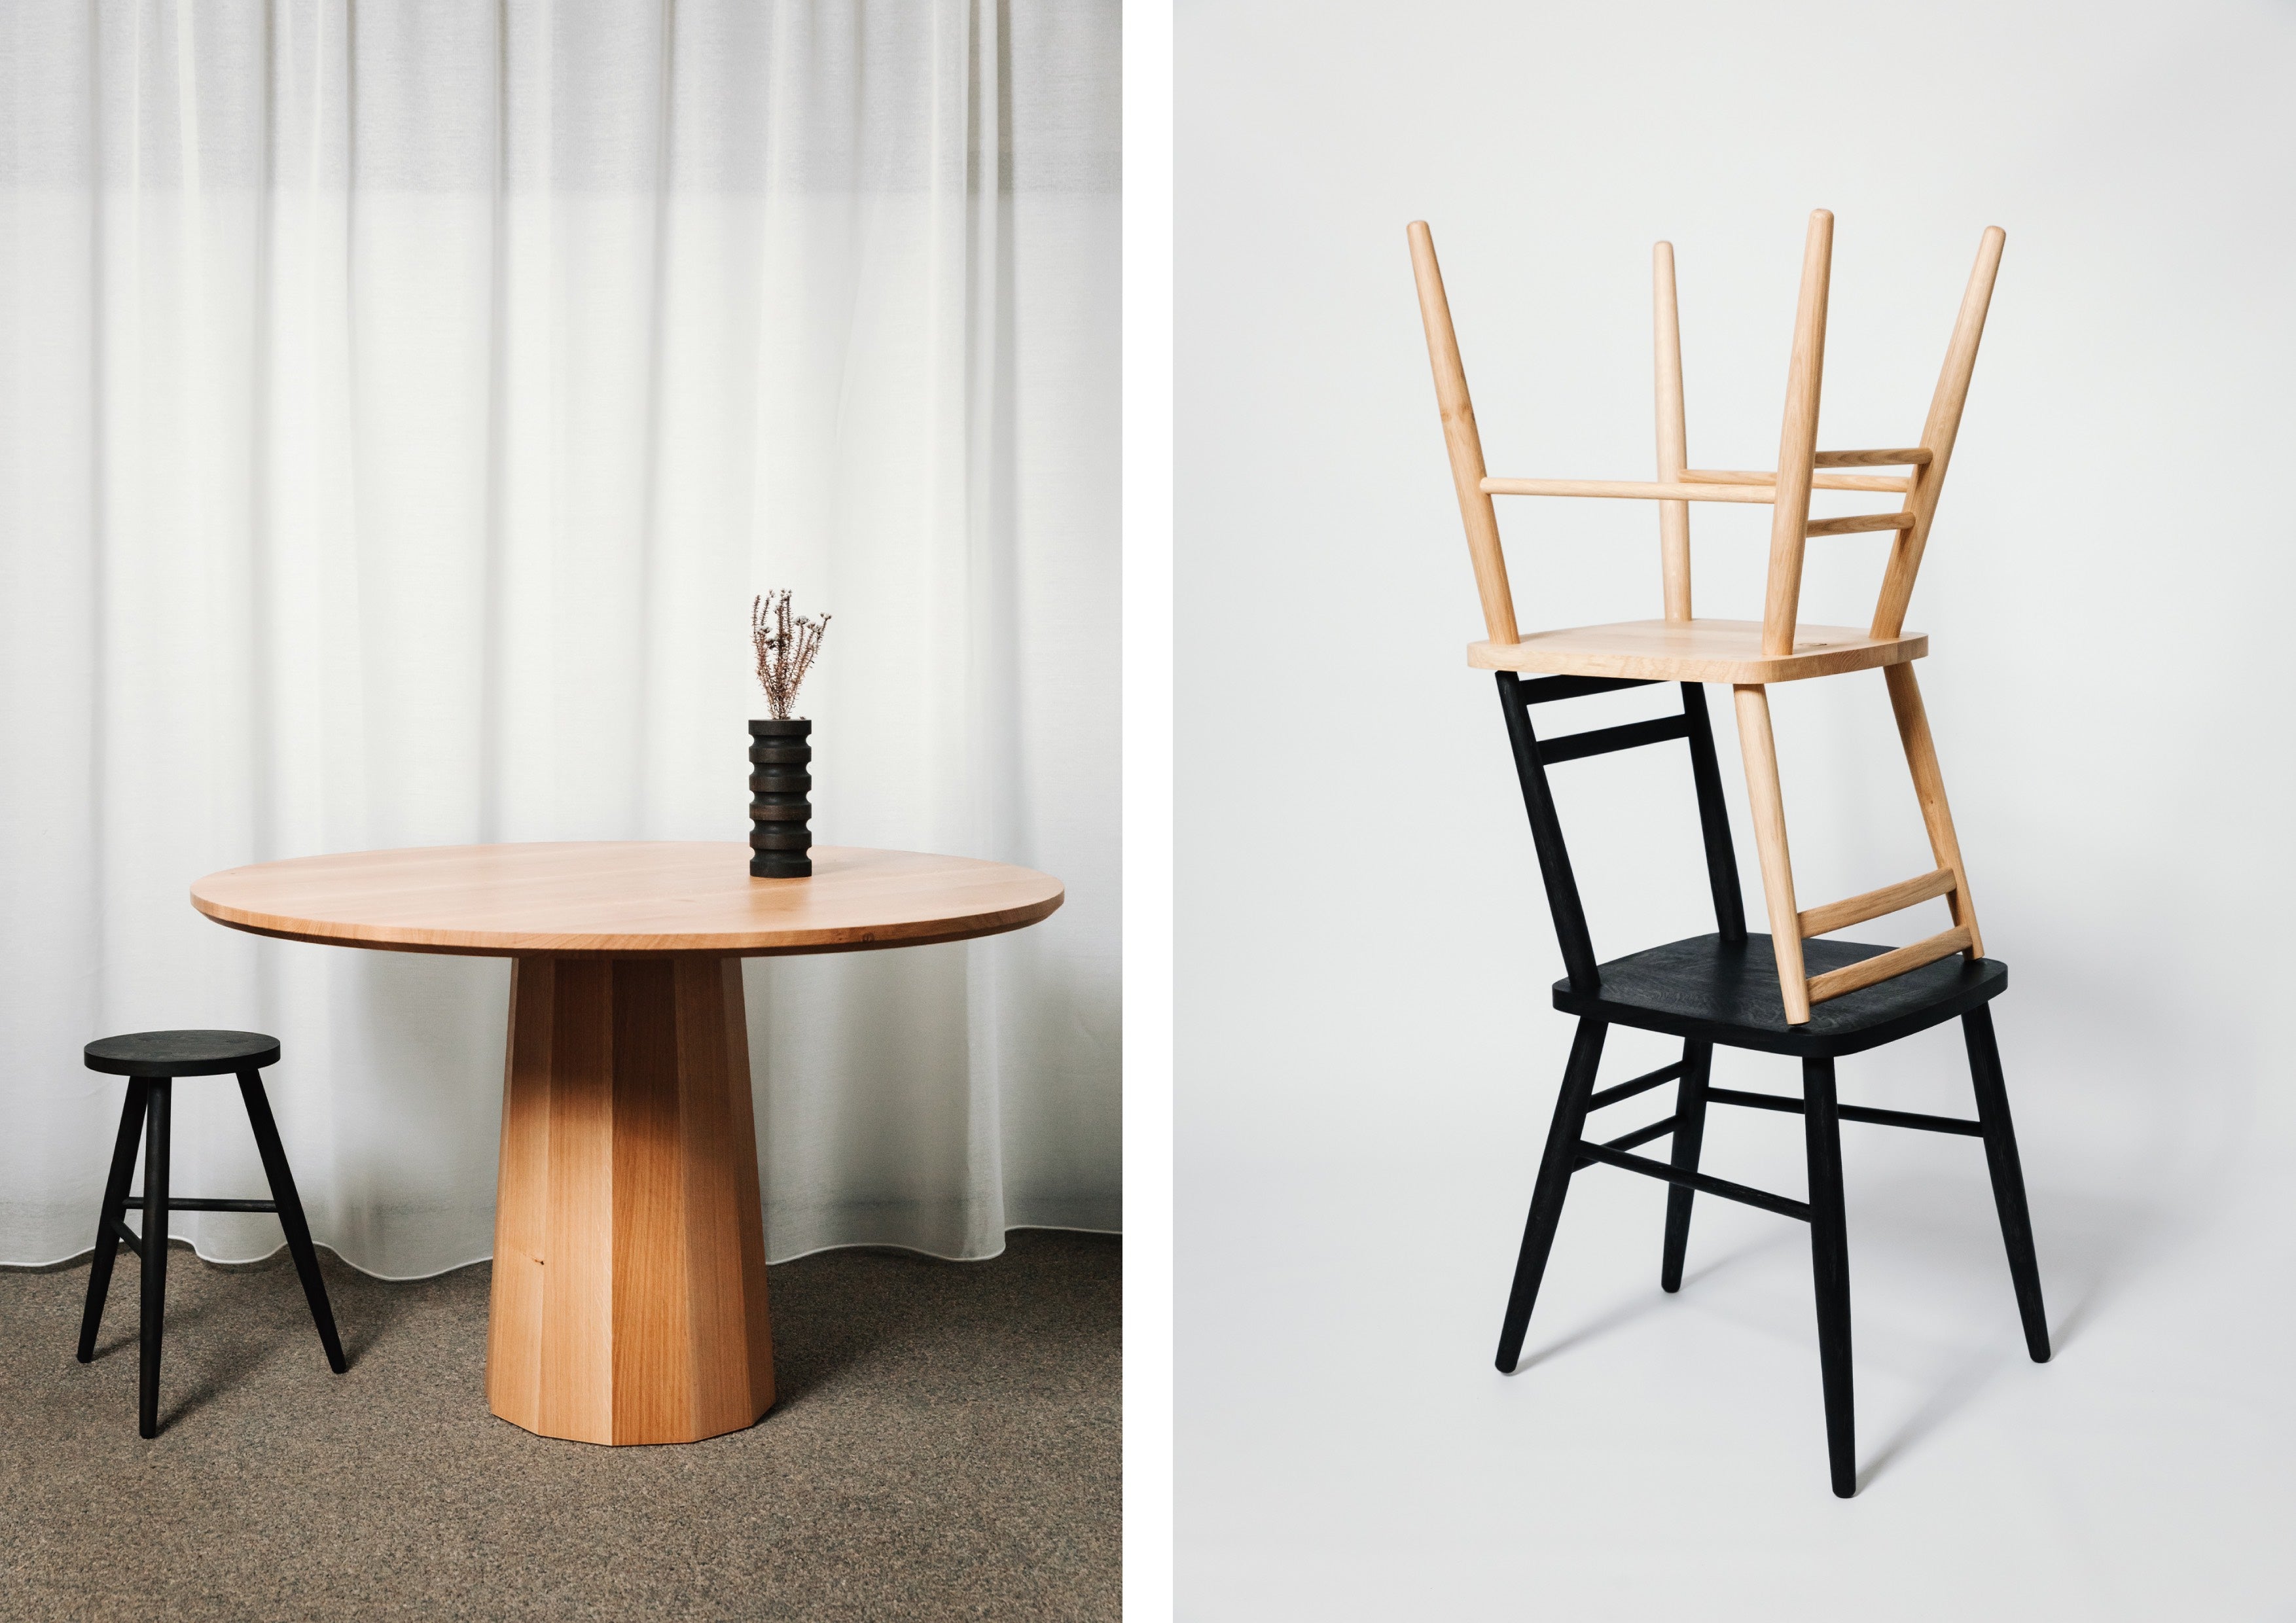 Our Polygon Pedestal Dining Table, Parlour Stool and Parlour Chairs in natural and ebonised oak